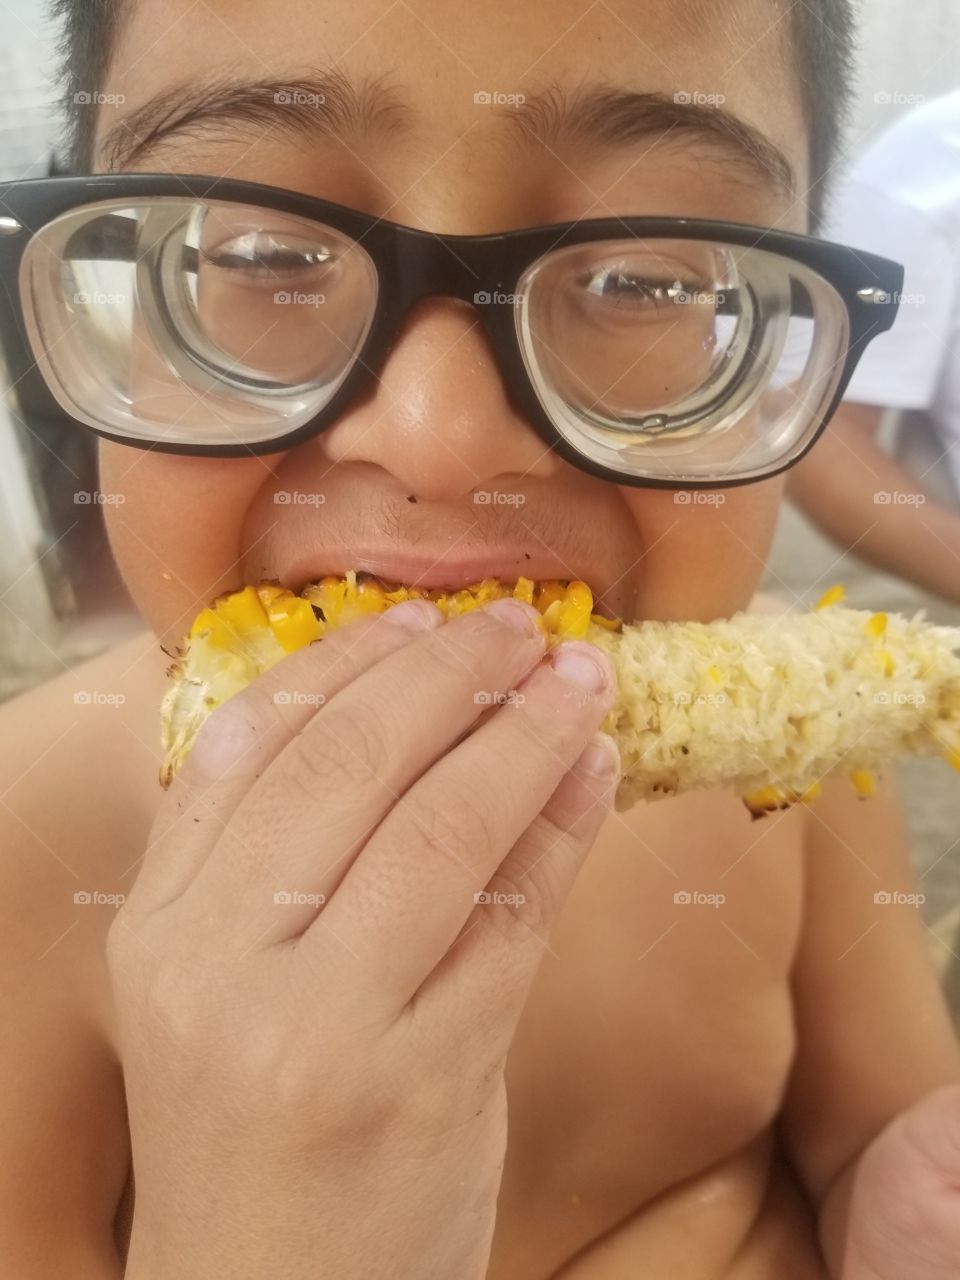 Child Eating yummy crunchy roasted corn on the cob in El Salvador